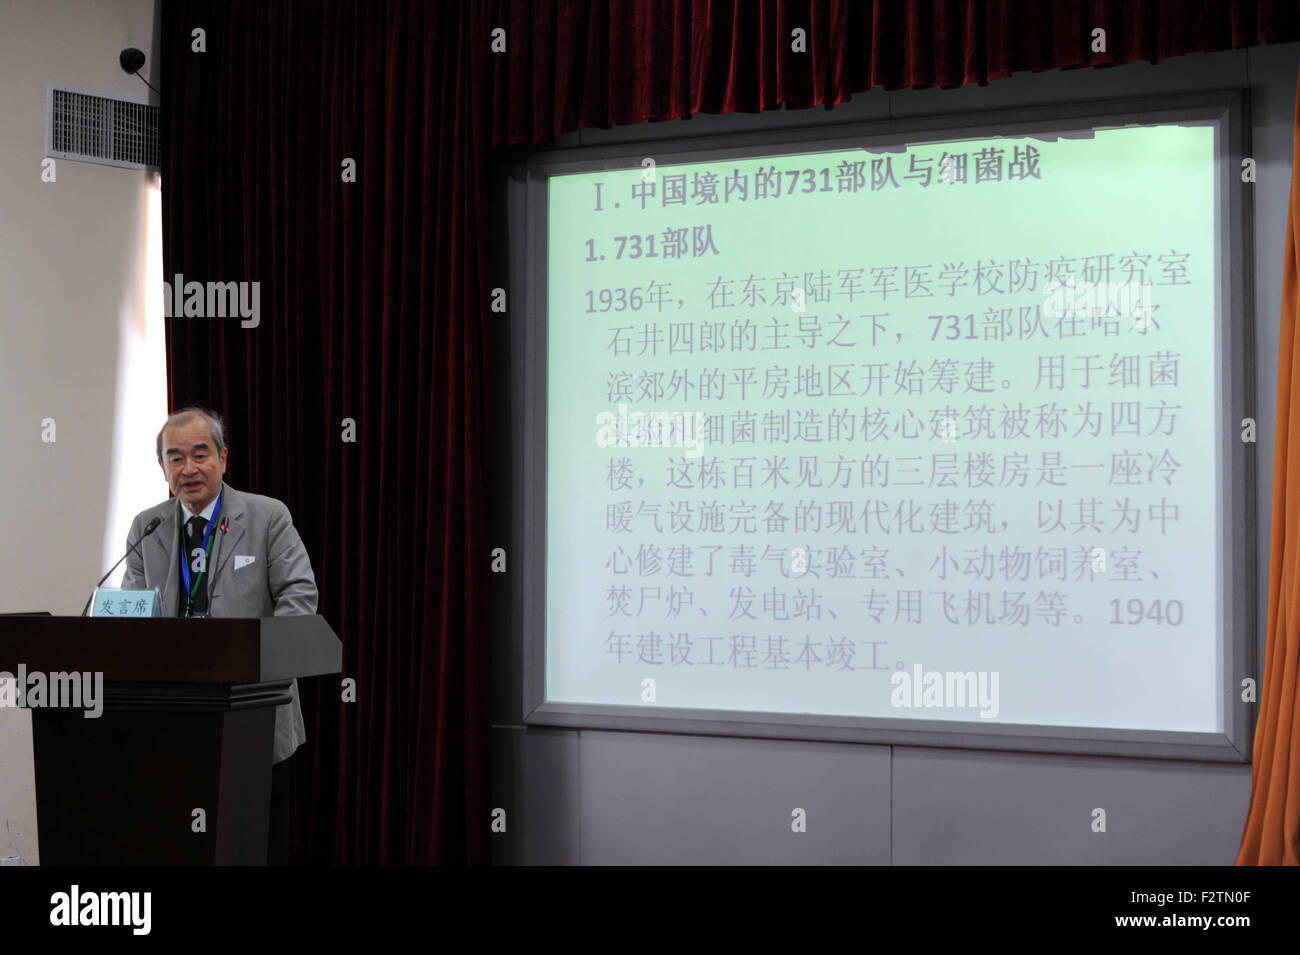 Harbin, China's Heilongjiang Province. 24th Sep, 2015. Takao Matsumura, an honorary professor of Janpan's Keio University, speaks at an international symposium on the war crime of Japanese Army Unit 731 in Harbin City, the seat of former headquarters of Unit 731, northeast China's Heilongjiang Province, Sept. 24, 2015. Unit 731 was a biological and chemical warfare research base established in 1935. At least 3,000 people died at the base between 1939 and 1945, mostly in experiments for the development of biological weapons. © Wang Song/Xinhua/Alamy Live News Stock Photo